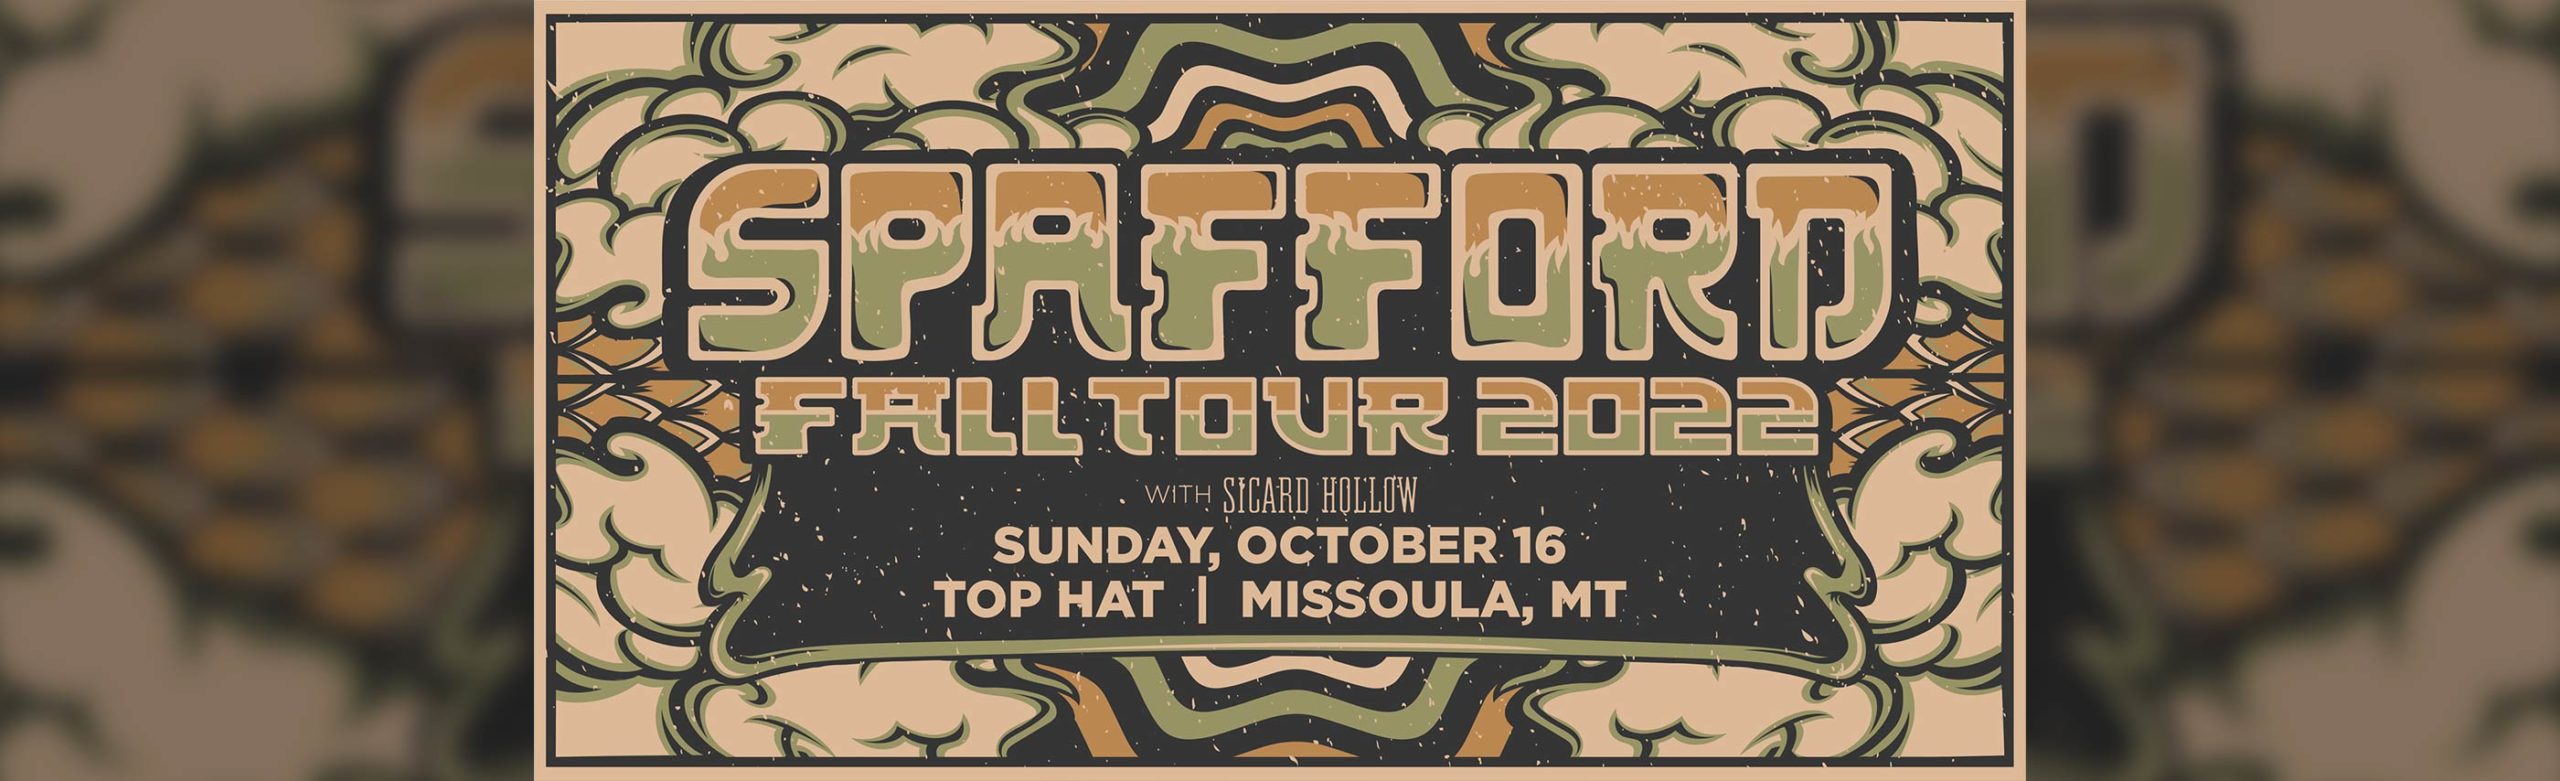 Event Info: Spafford at The Top Hat 2022 Image